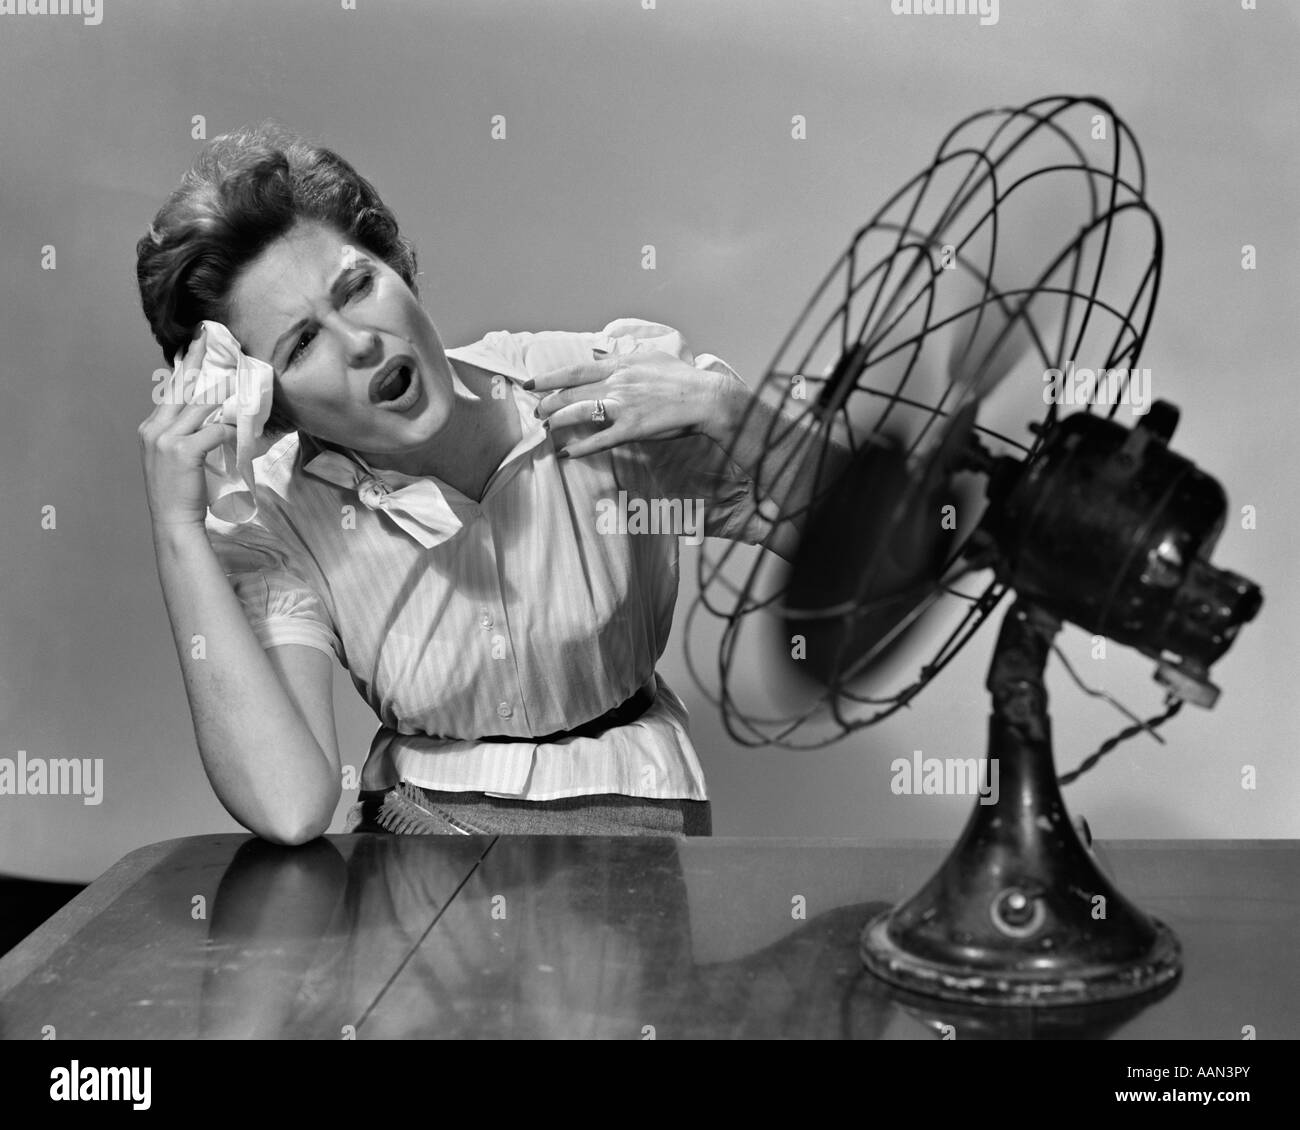 1950s VERY HOT WOMAN WIPING FOREHEAD SITTING IN FRONT OF FAN Stock Photo